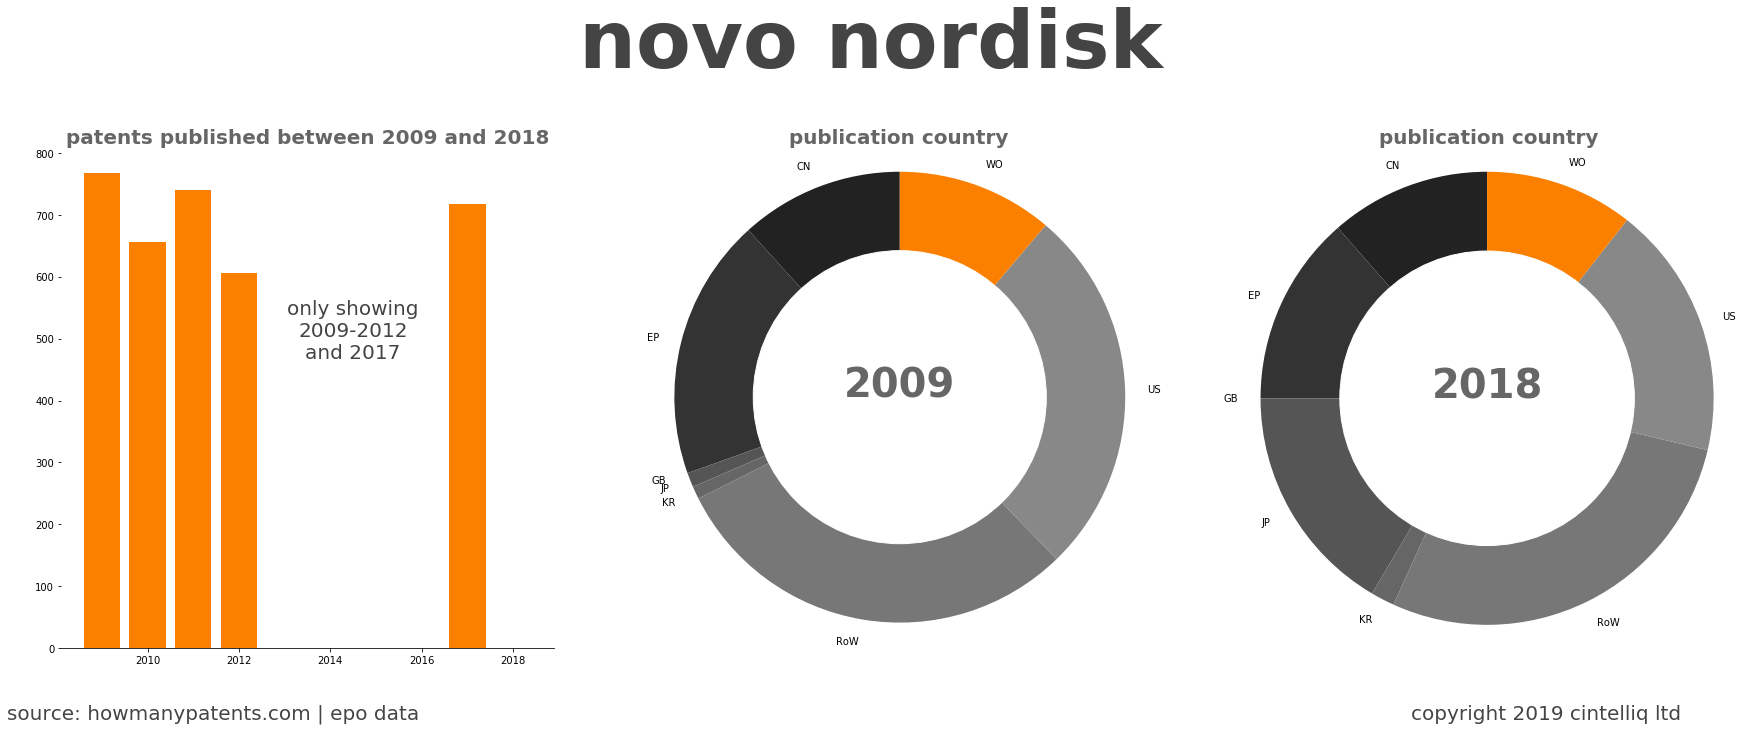 summary of patents for Novo Nordisk